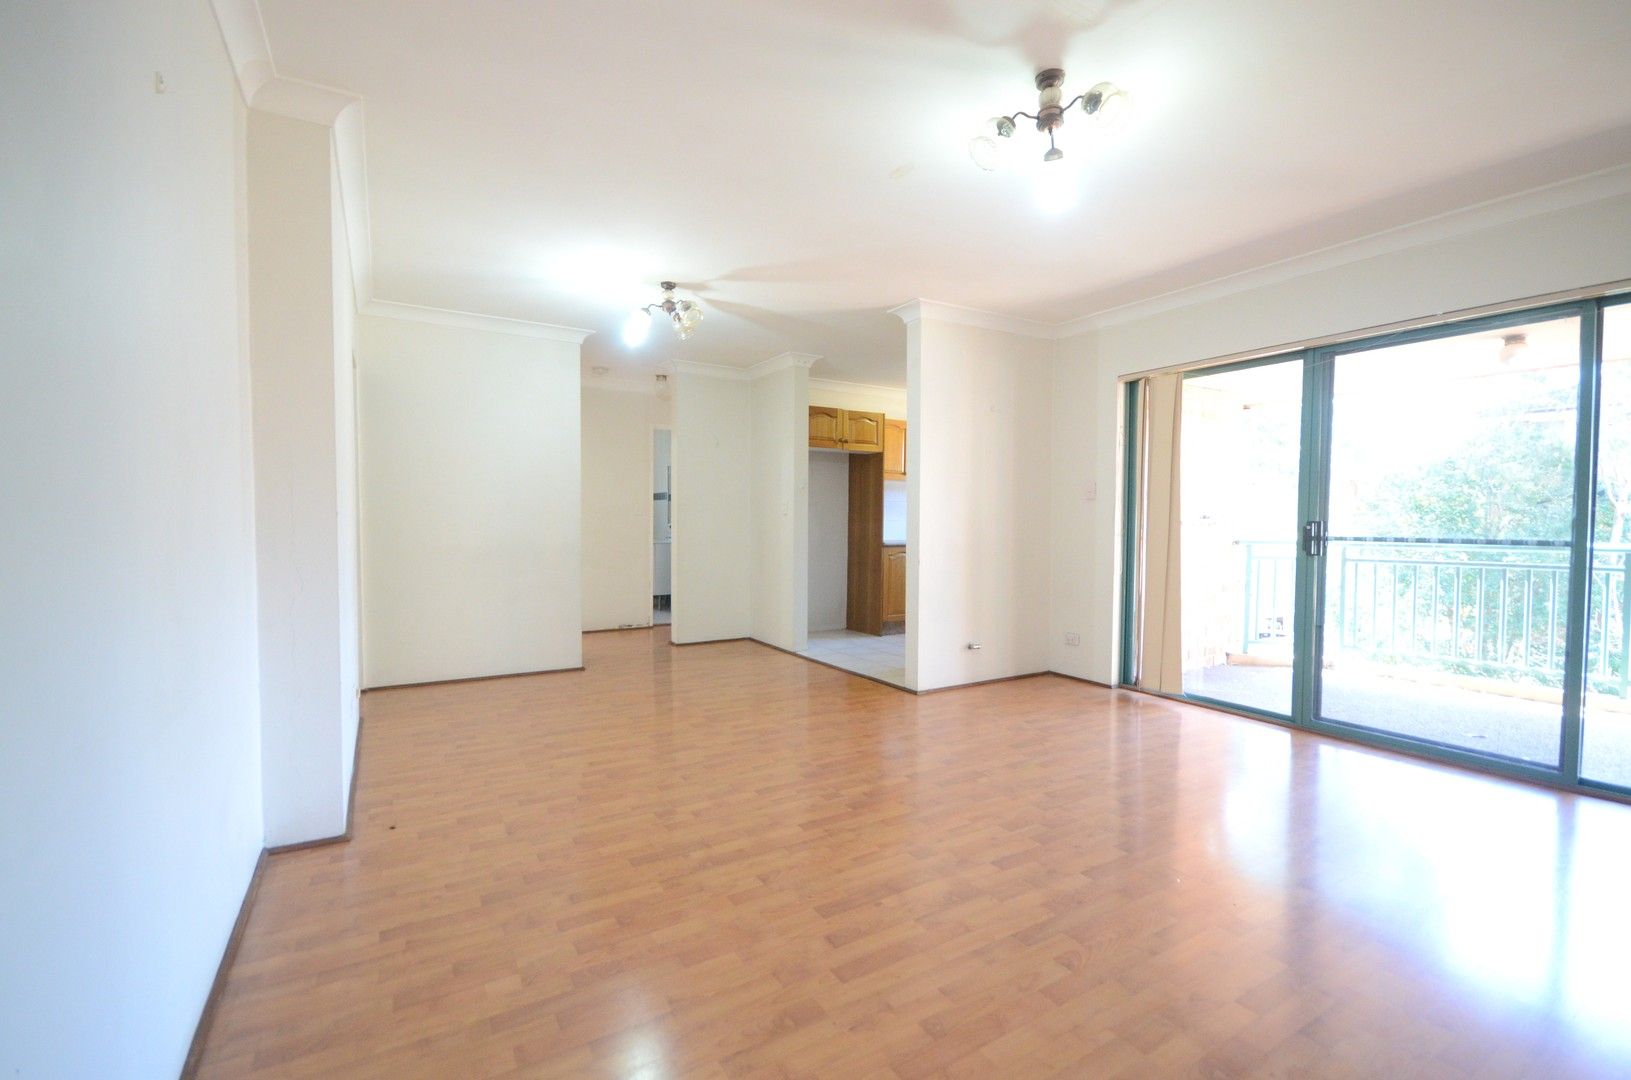 2 bedrooms Apartment / Unit / Flat in 16/249-251 Dunmore Street PENDLE HILL NSW, 2145